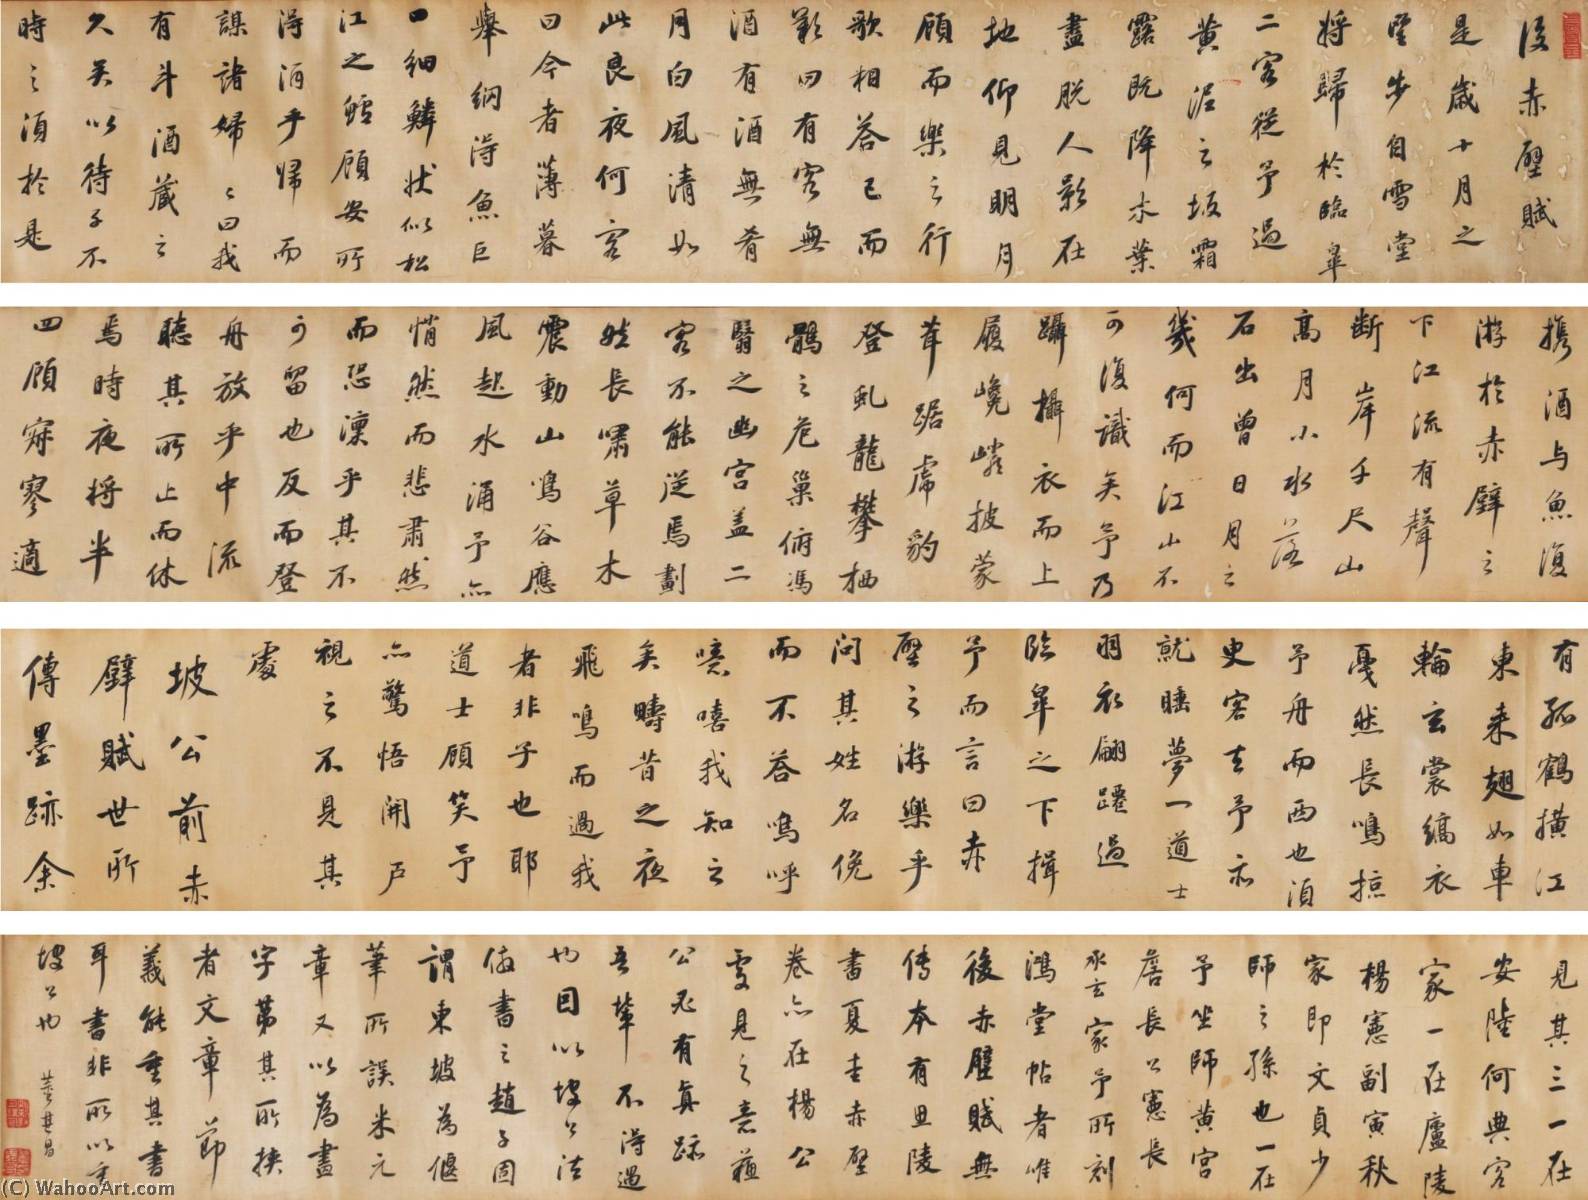 WikiOO.org - Encyclopedia of Fine Arts - Maalaus, taideteos Dong Qichang - ODE TO THE RED CLIFF IN RUNNING SCRIPT